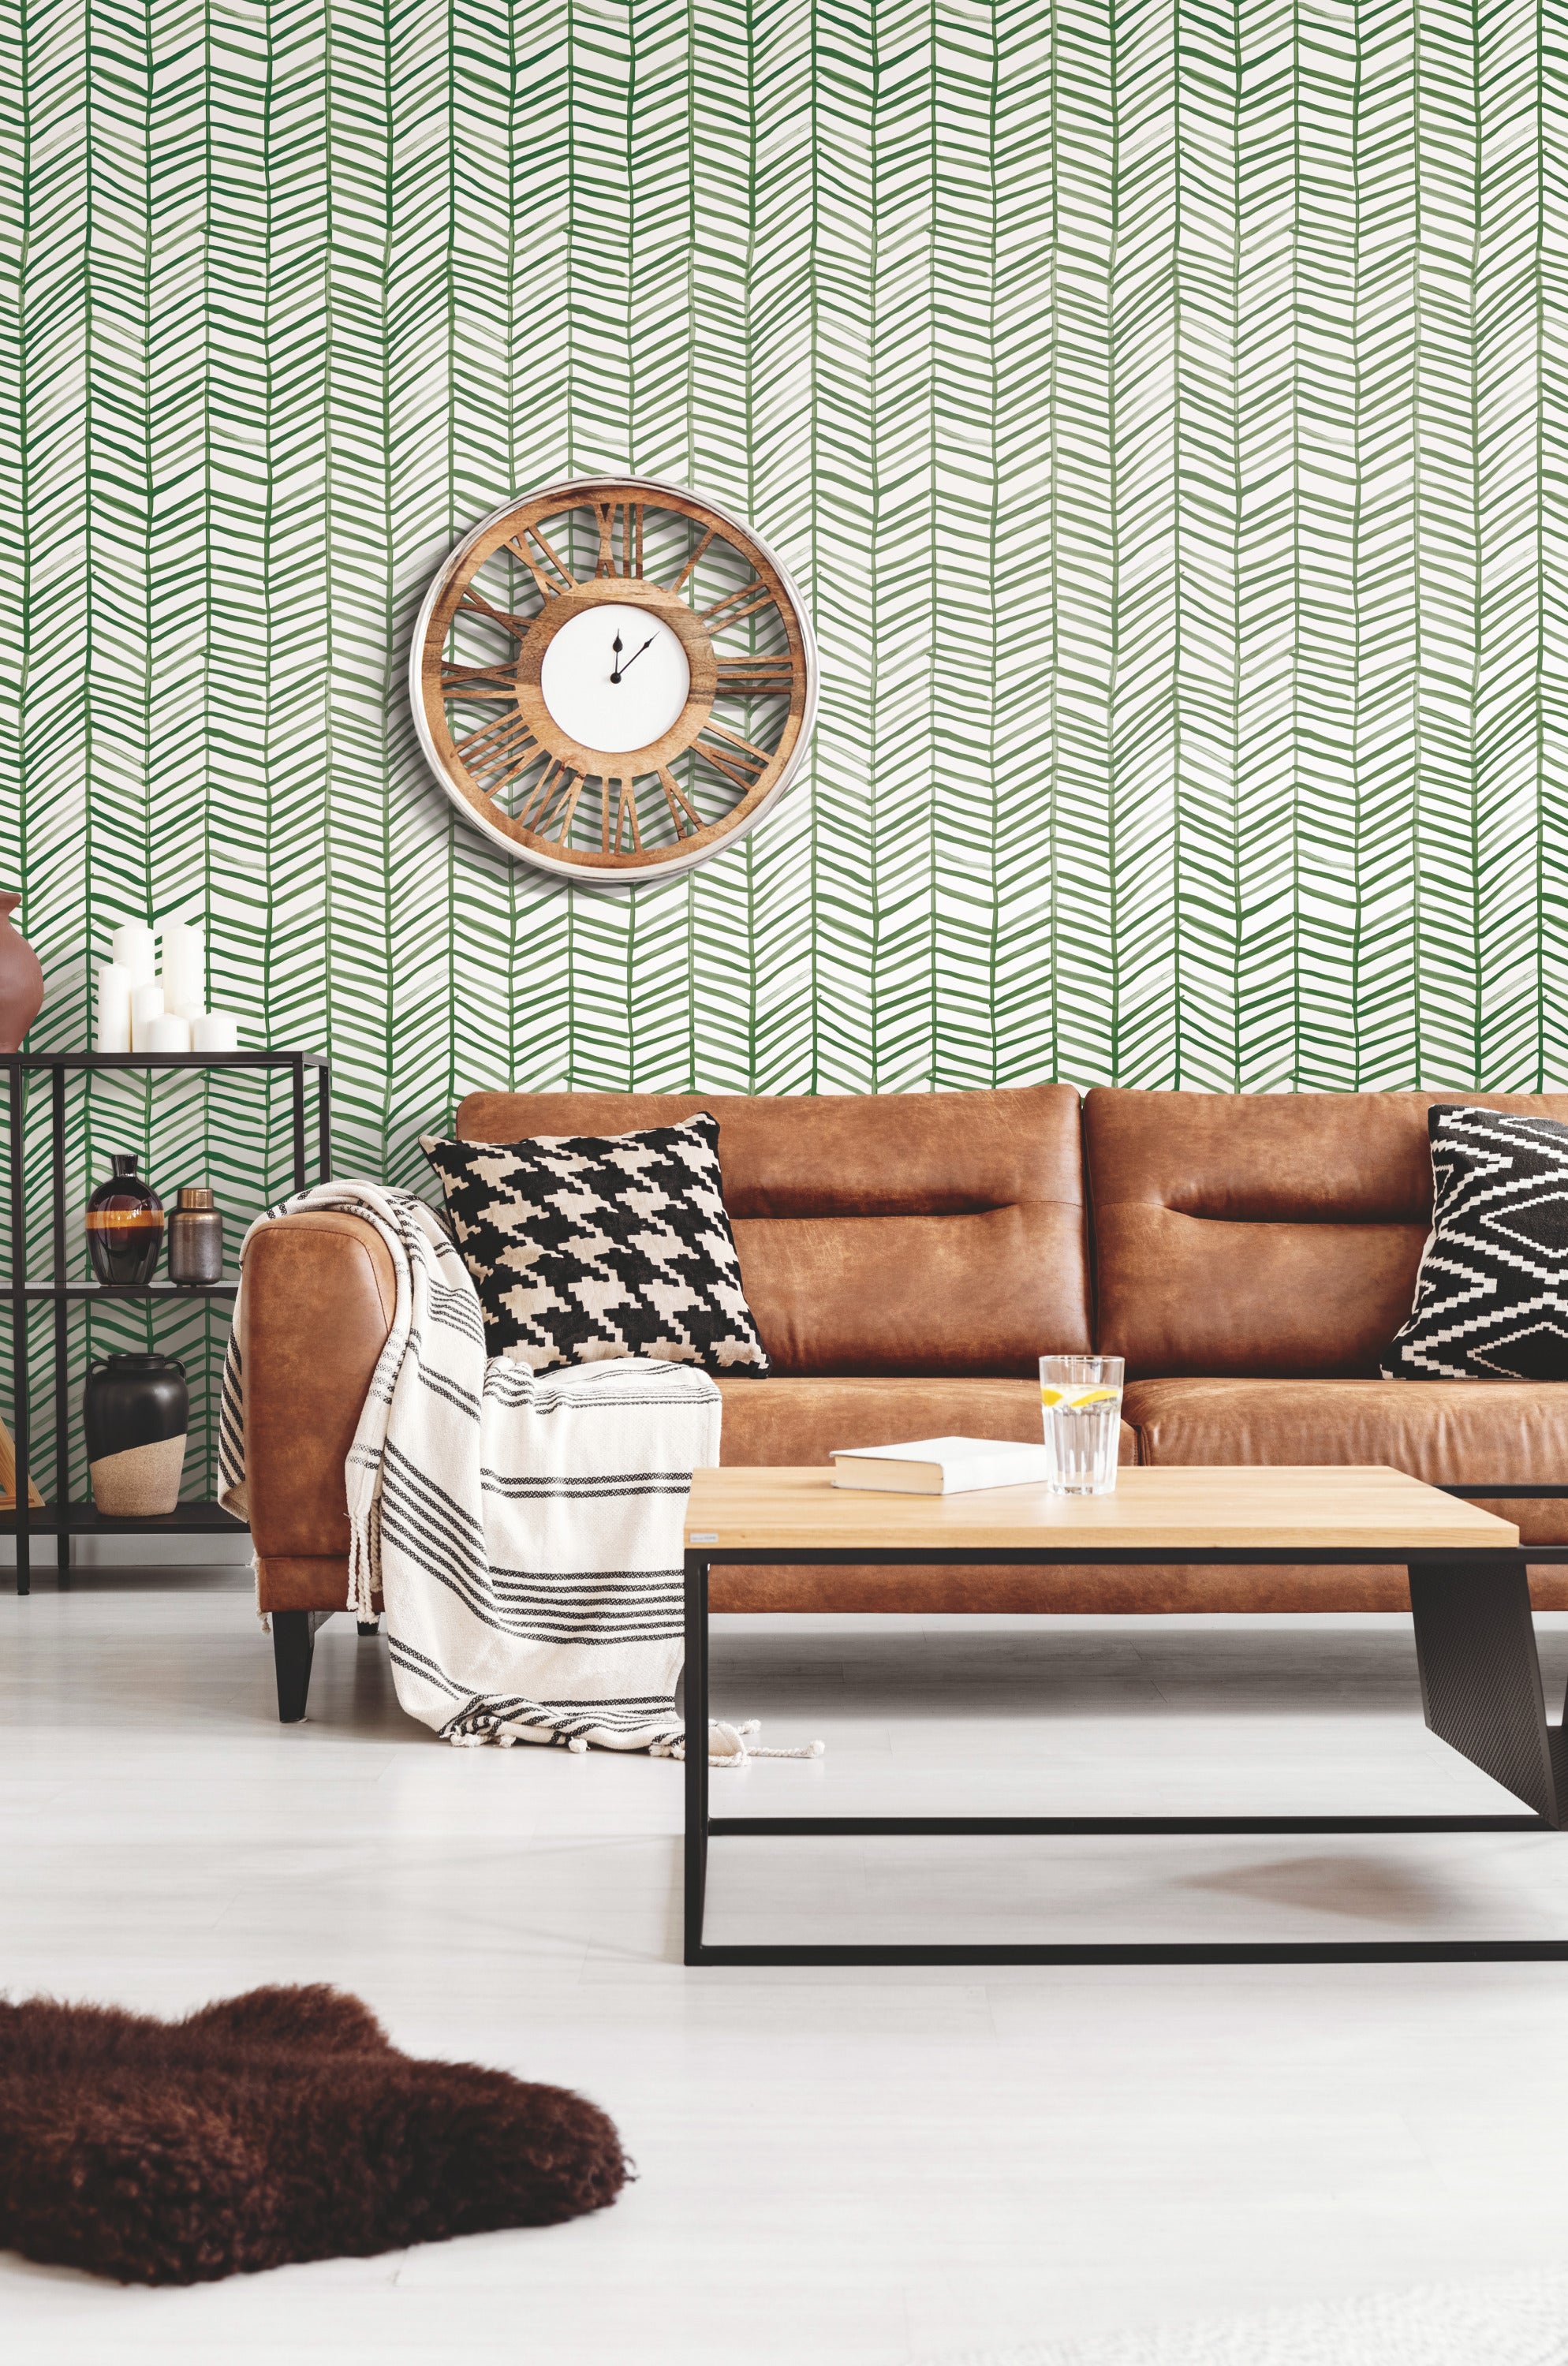 RoomMates Decor: Peel and Stick Wallpaper, Wall Decals and More